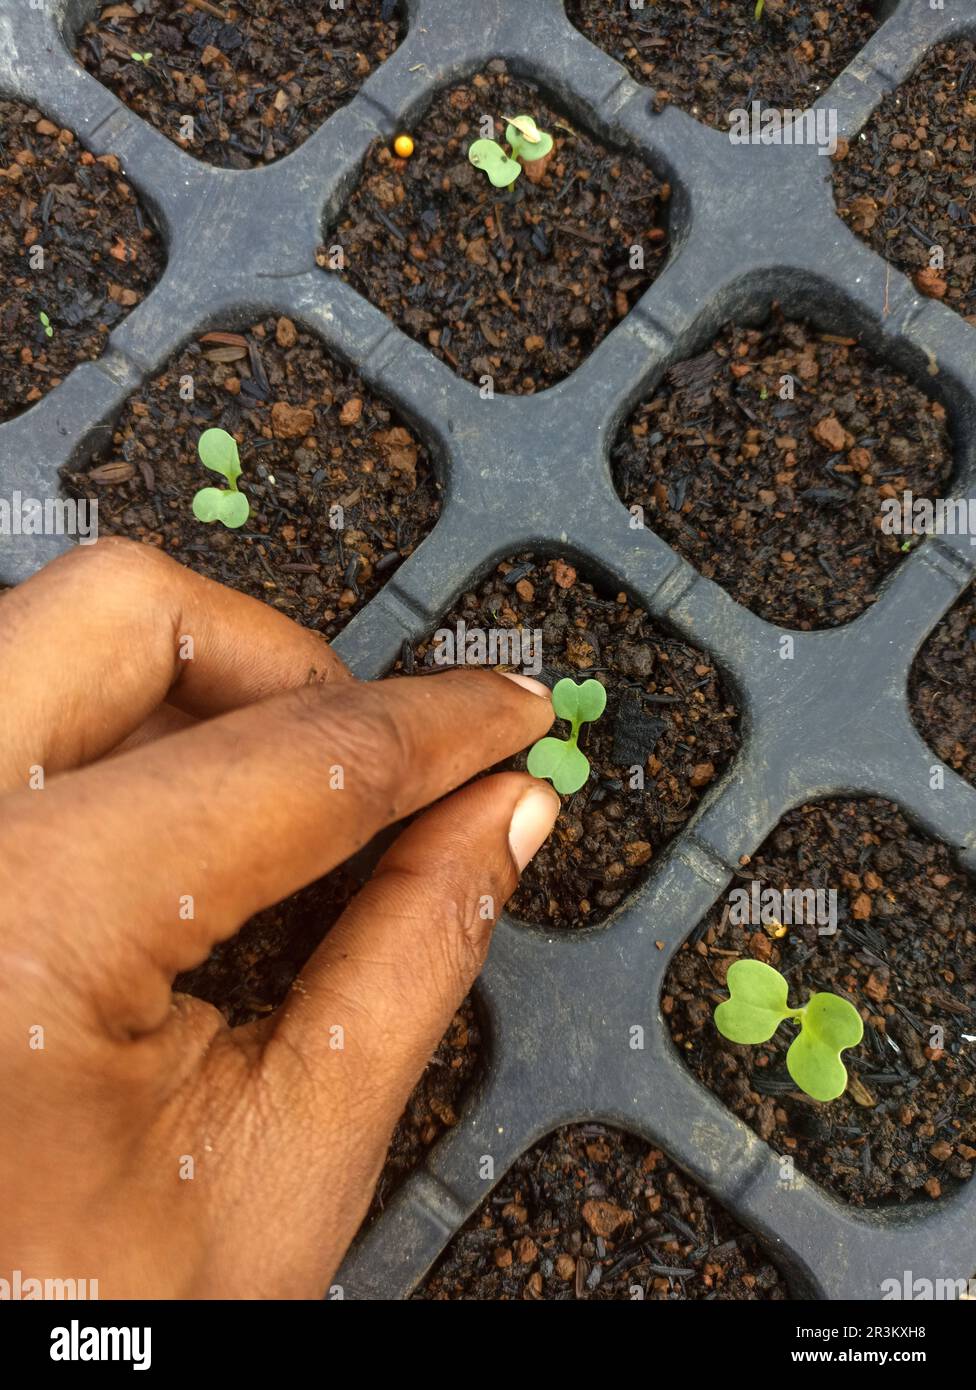 Farmer's Hands Caring for Seeds in the Seedling Tray. Stock Photo